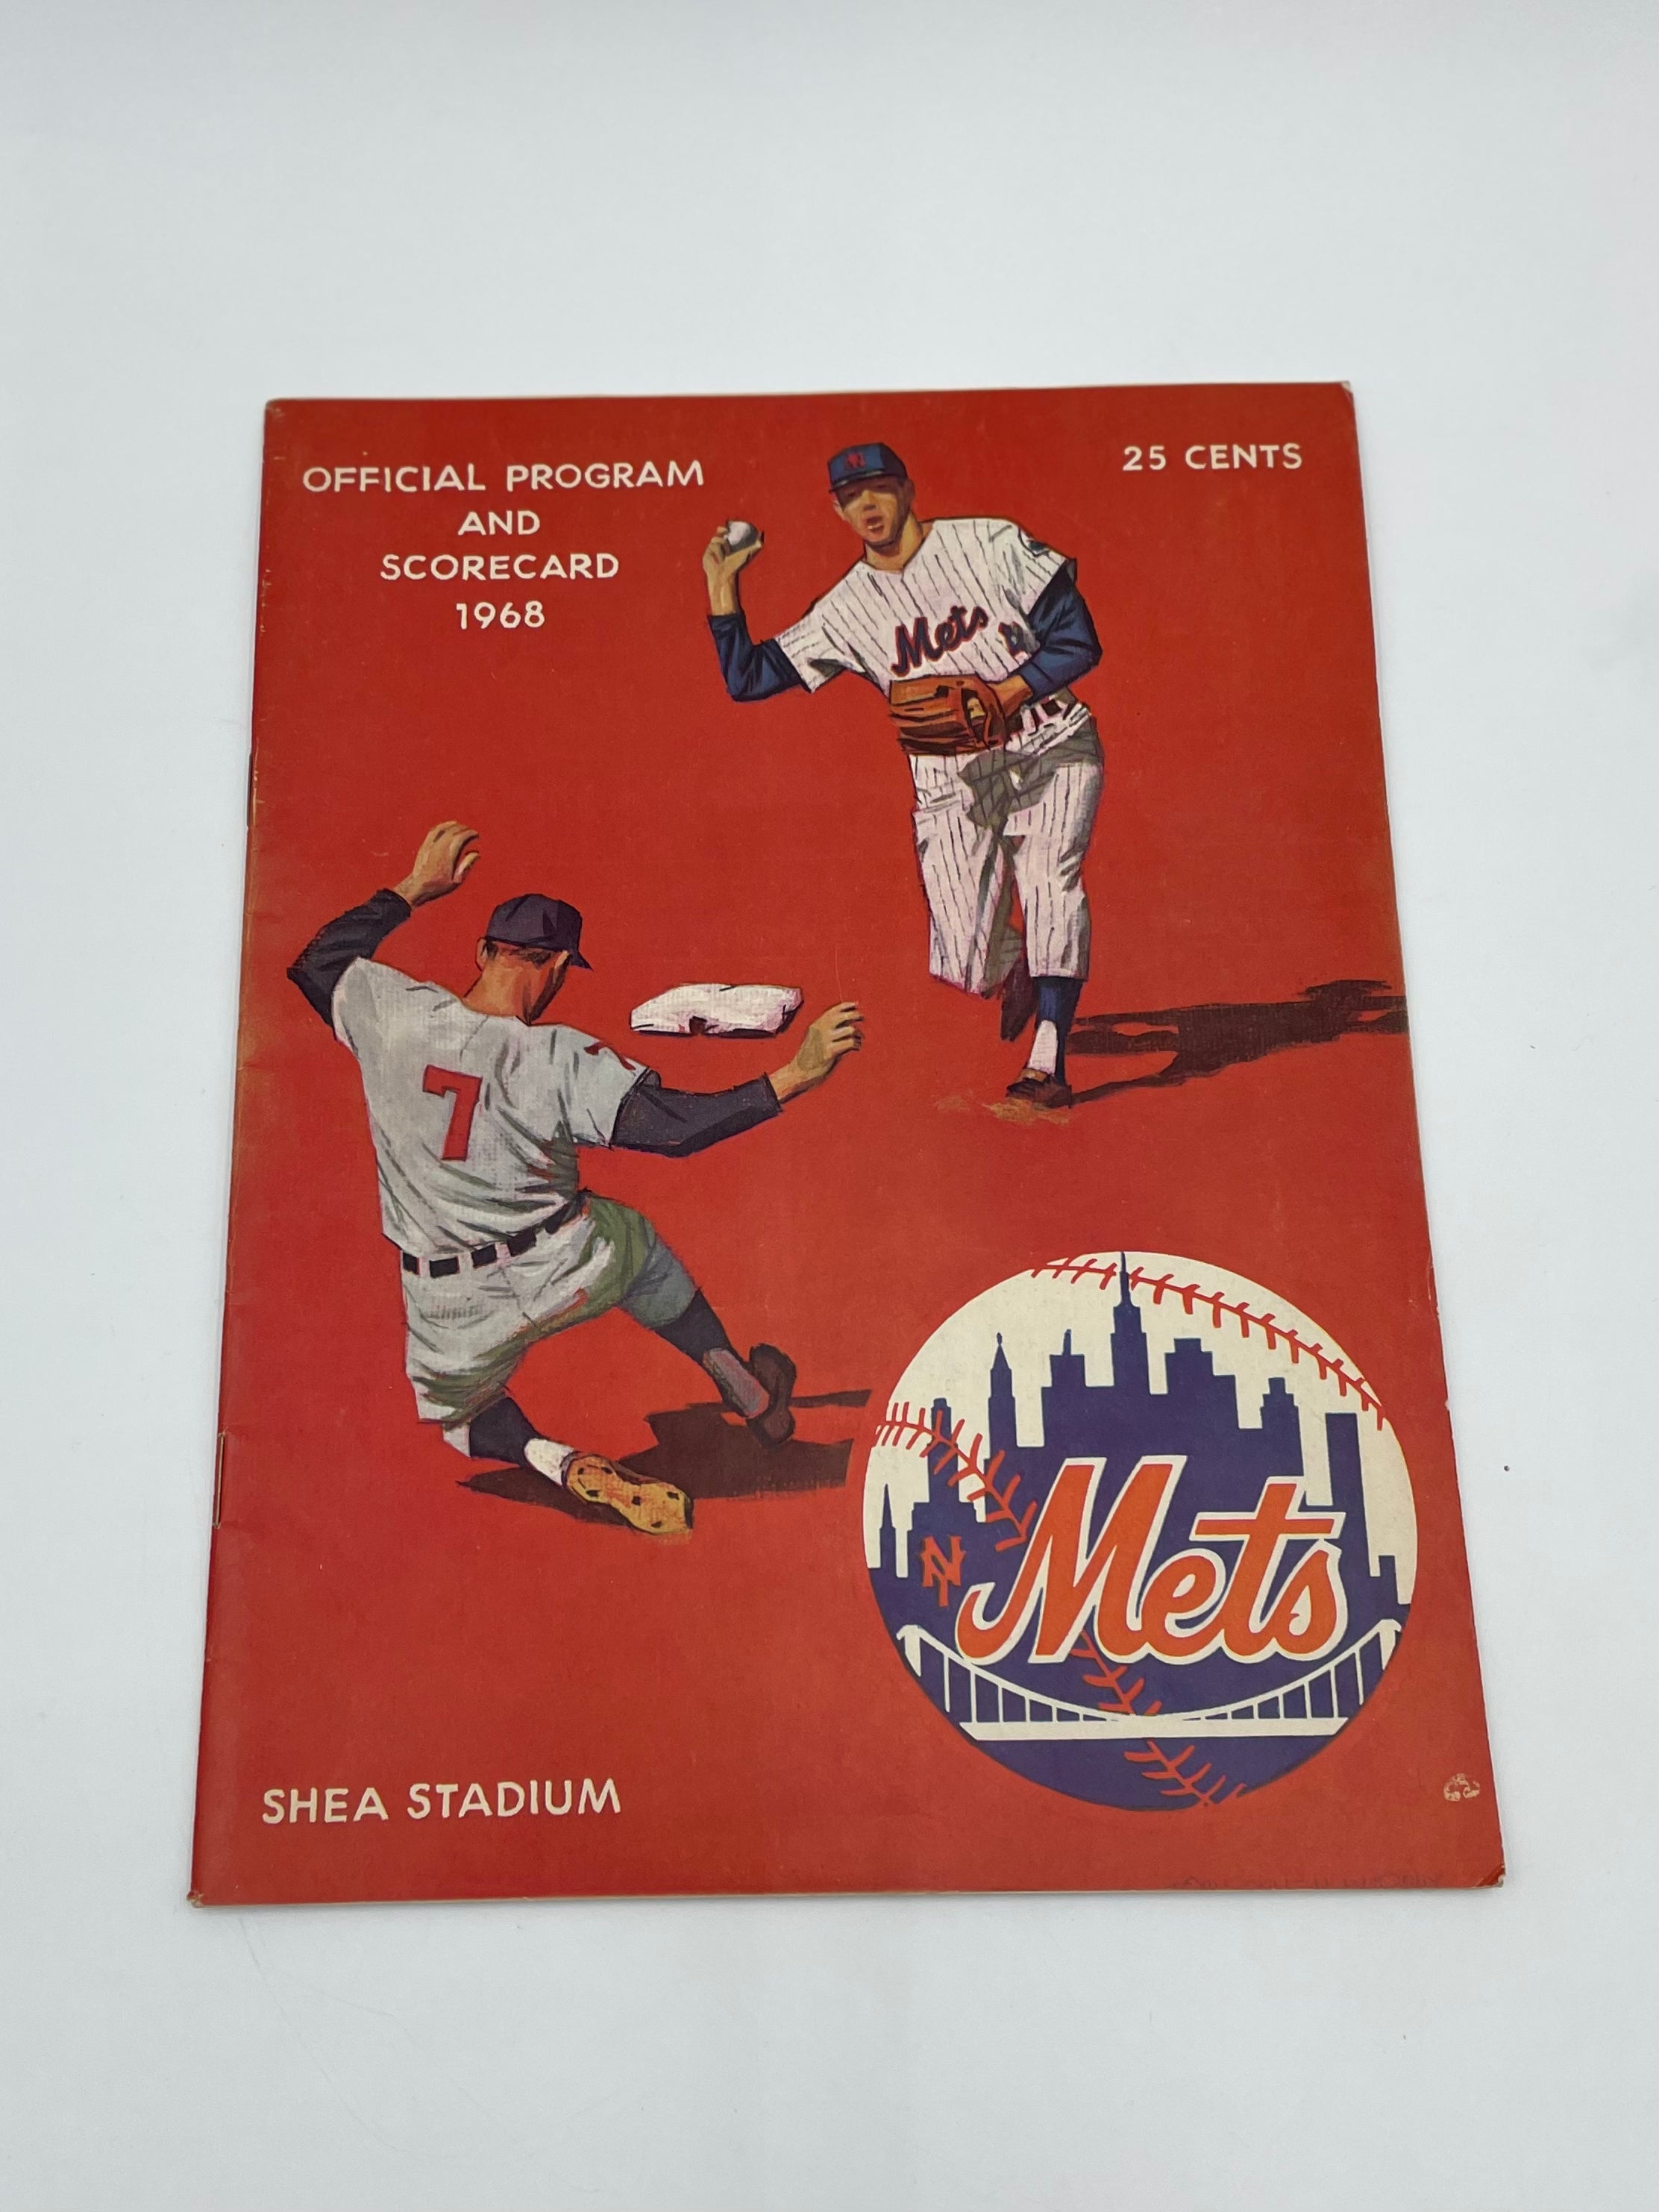 New York Mets - Official Program and Scoreboard 1968